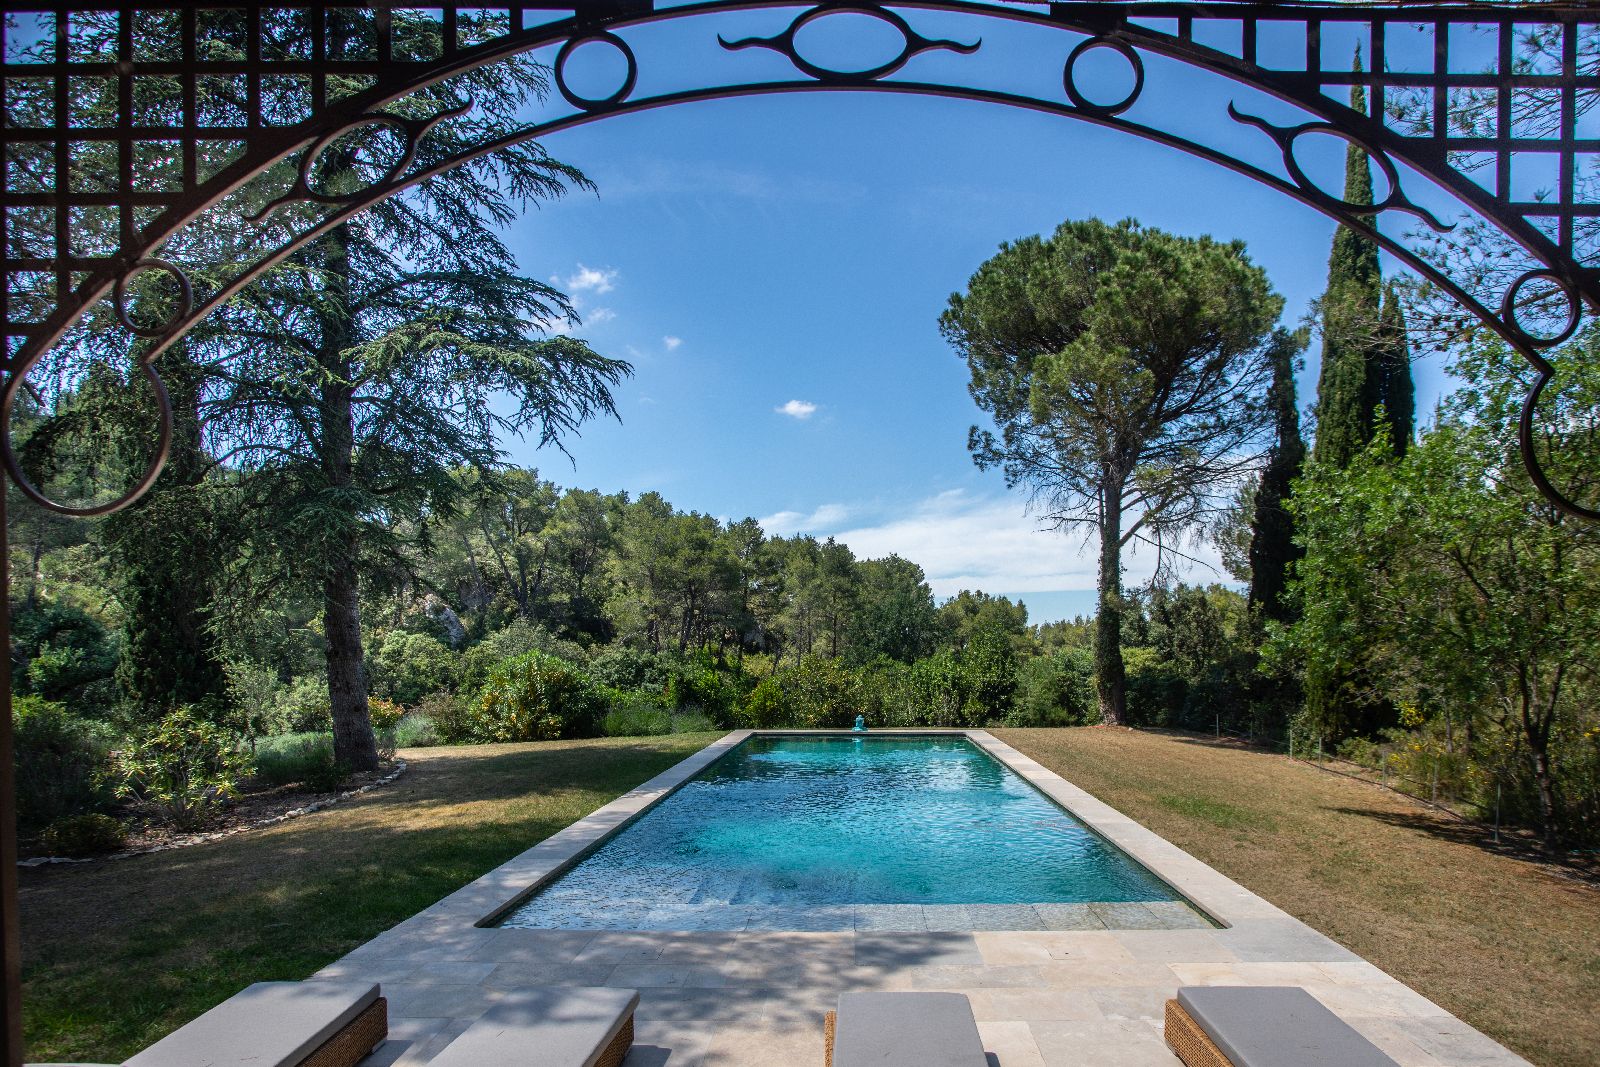 Metal arch leading to pool at Mas Calanquet in Provence